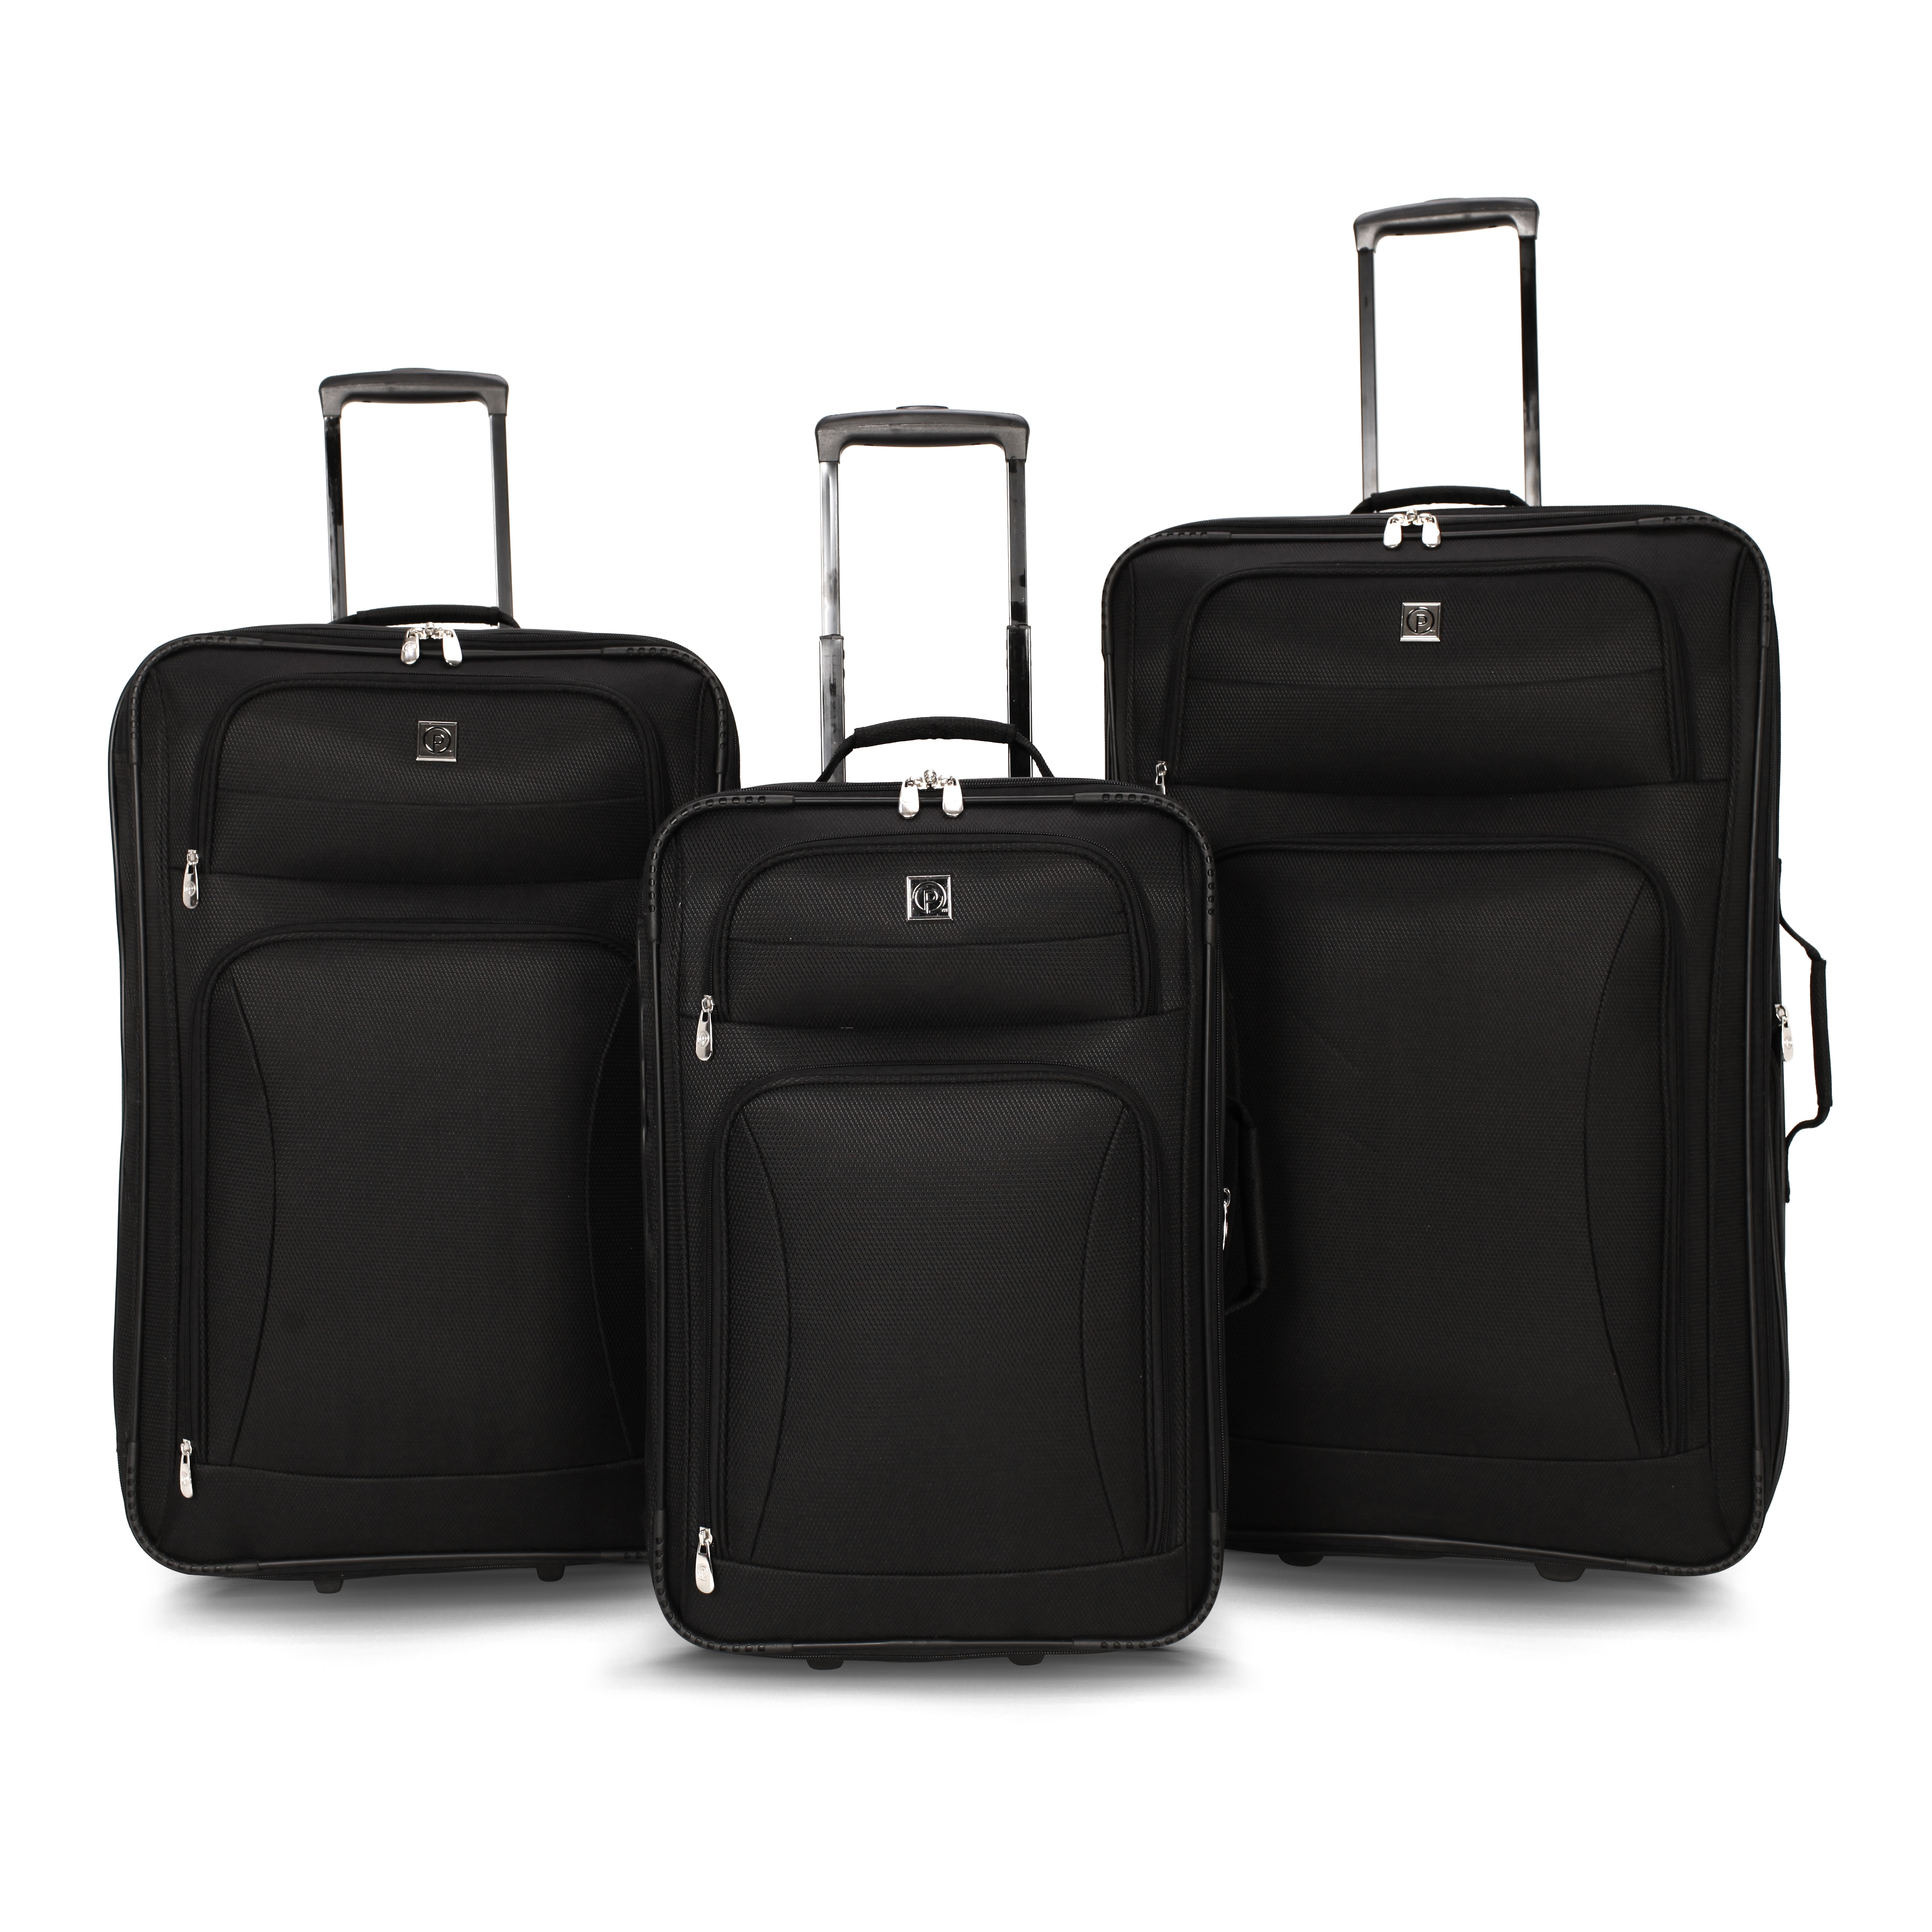 Protege 21" Regency Carry-on 2-Wheel Upright Luggage (Walmart Exclusive), Black - image 5 of 5